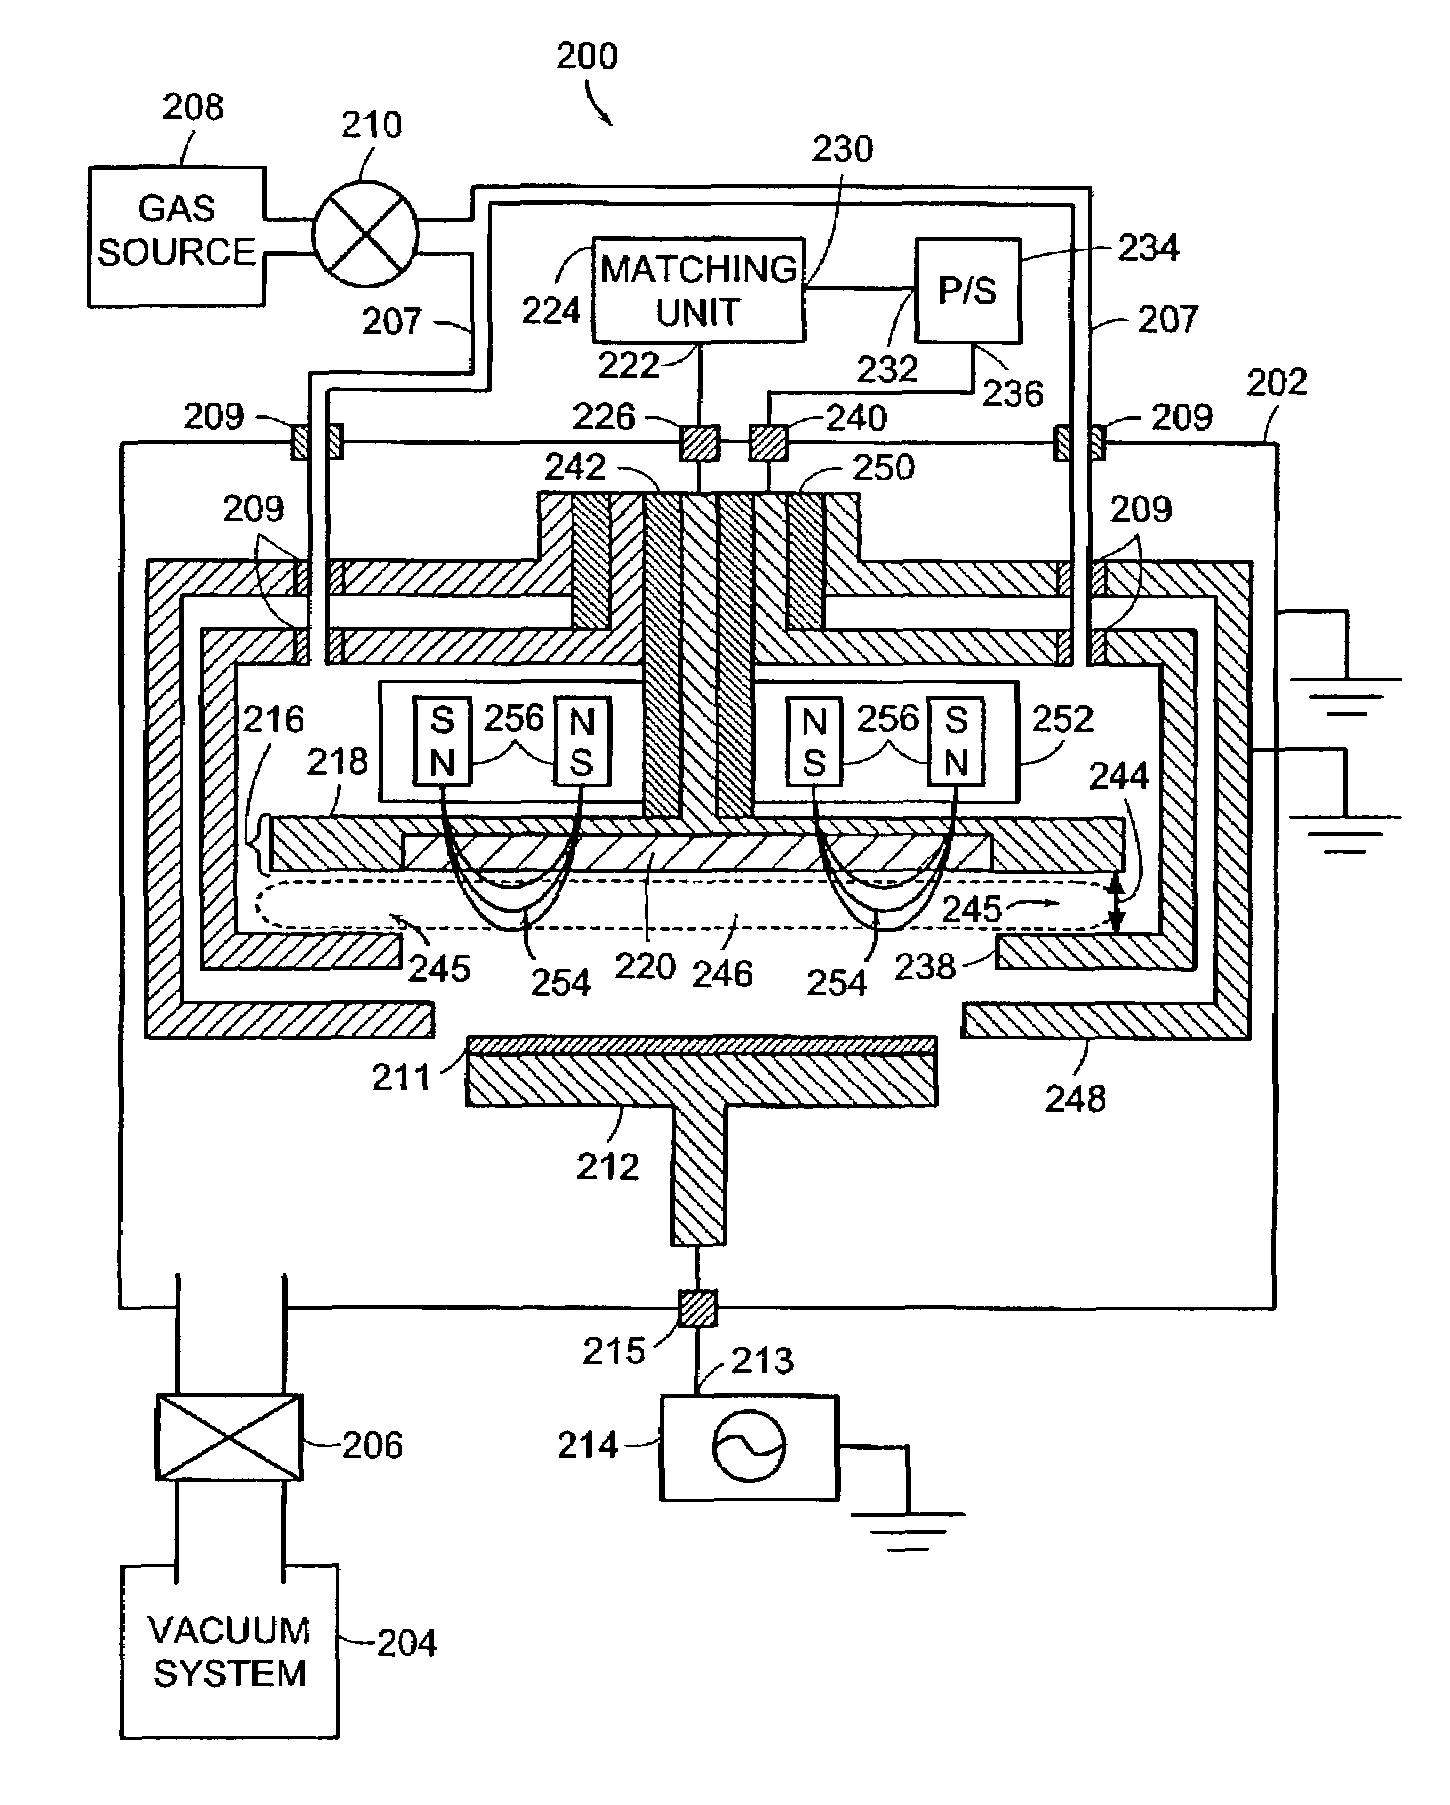 High-power pulsed magnetron sputtering